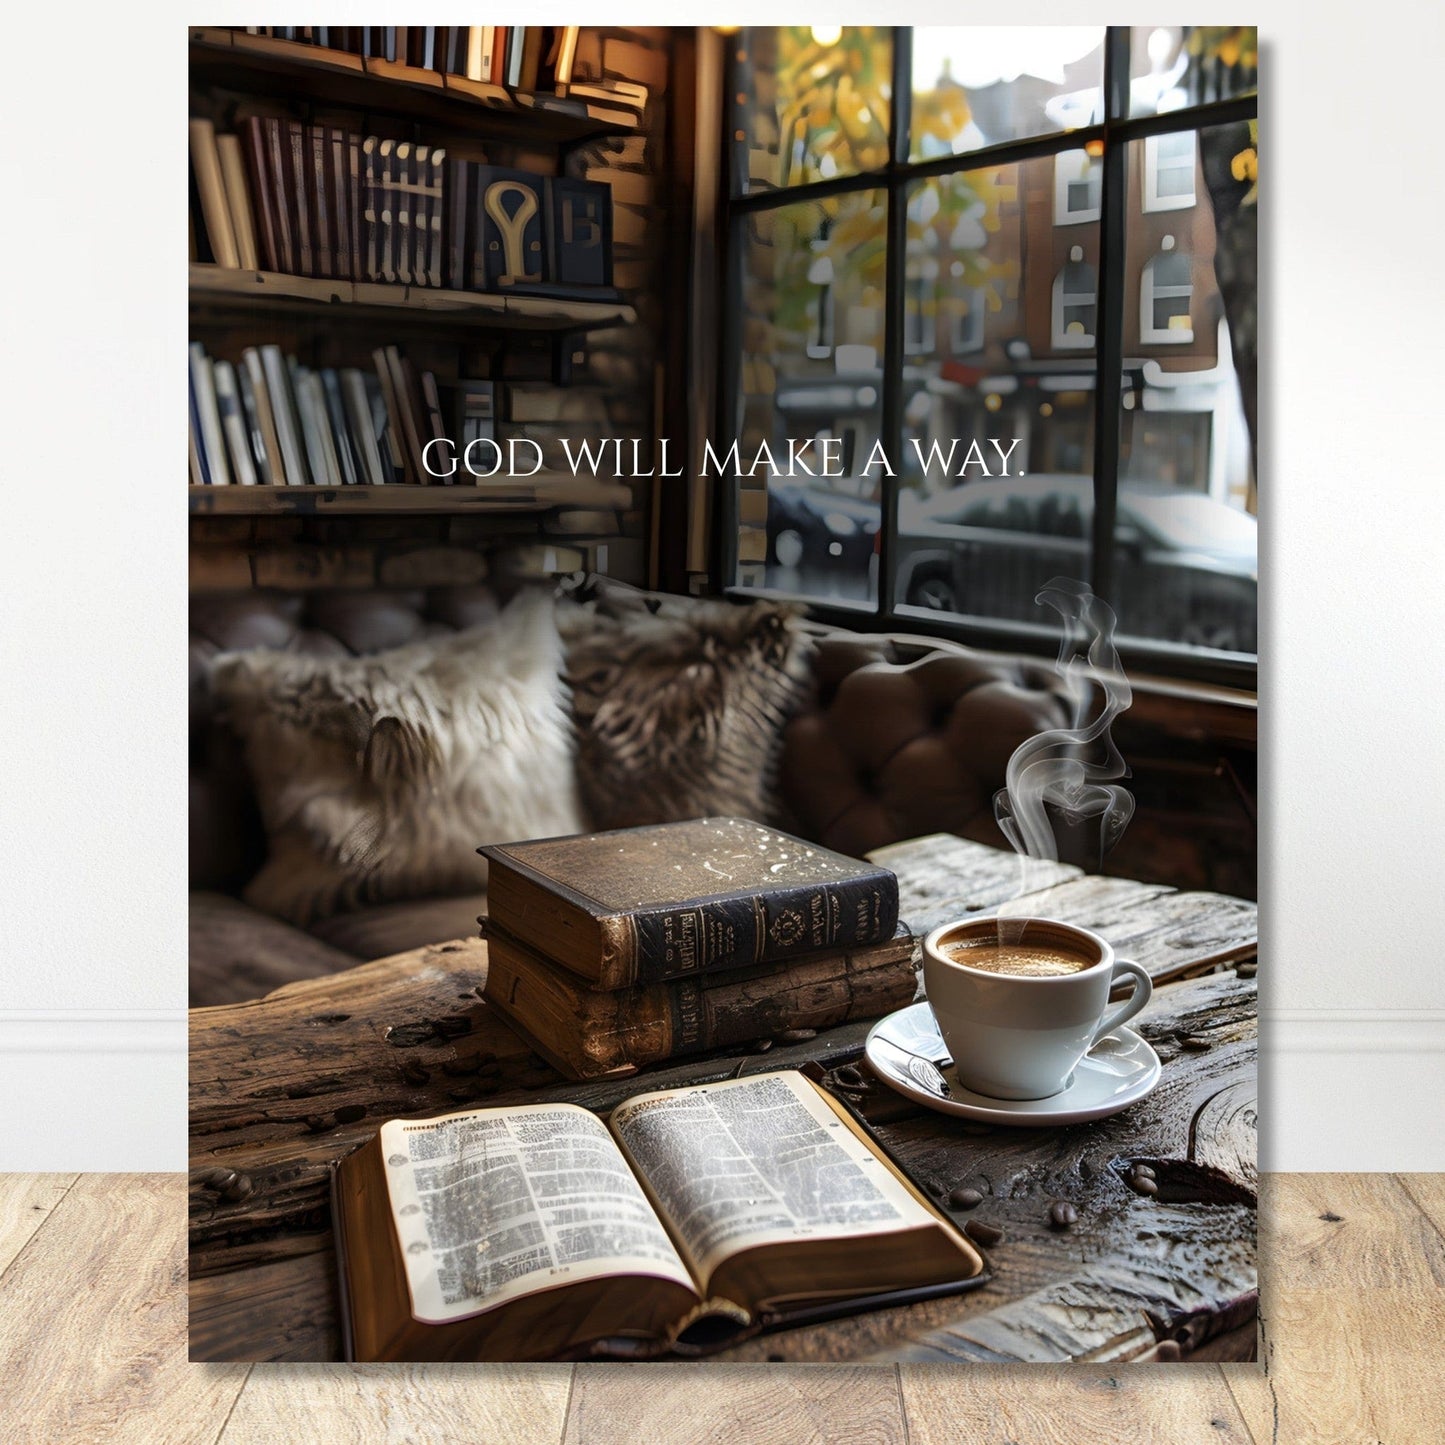 Coffee With My Father Print Material 40x50 cm / 16x20″ / Premium Matte Paper Poster / - God Will Make A Way